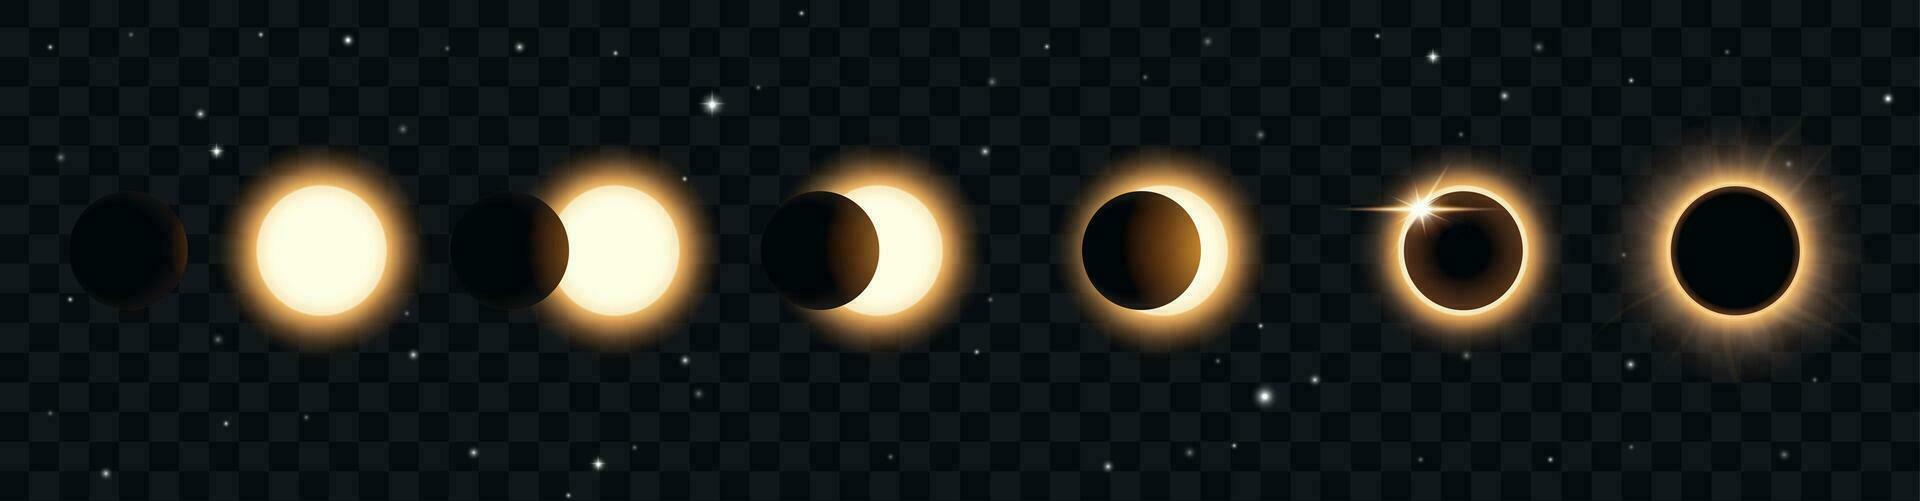 Eclipse Stages Realistic vector